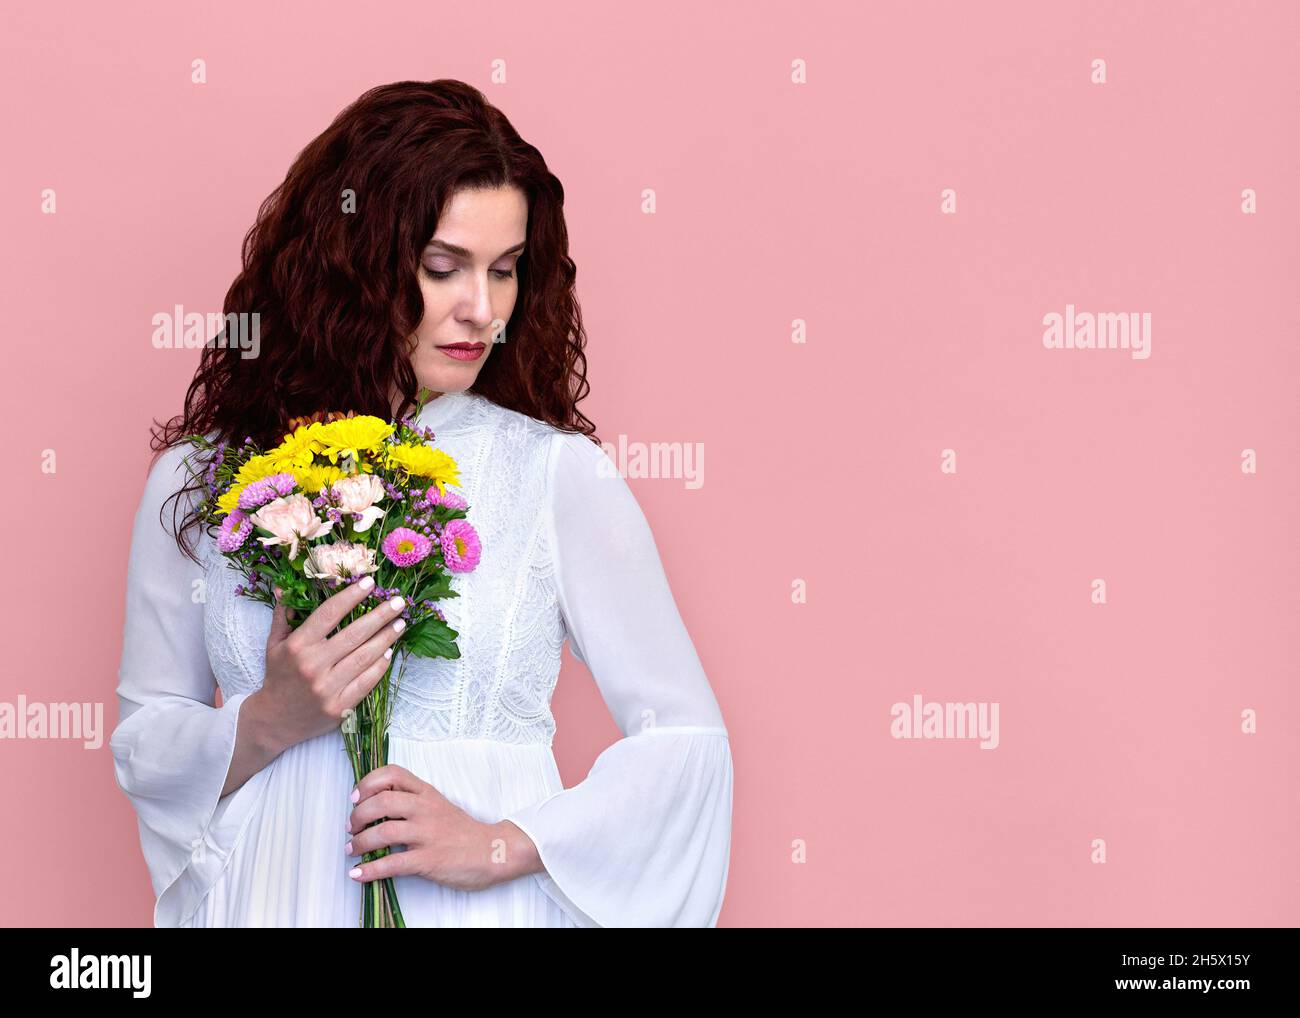 Woman Holding Flowers to Chest Looking Down on Pink Background. Portrait of sad pensive woman in white dress holding bouquet to her chest. Stock Photo